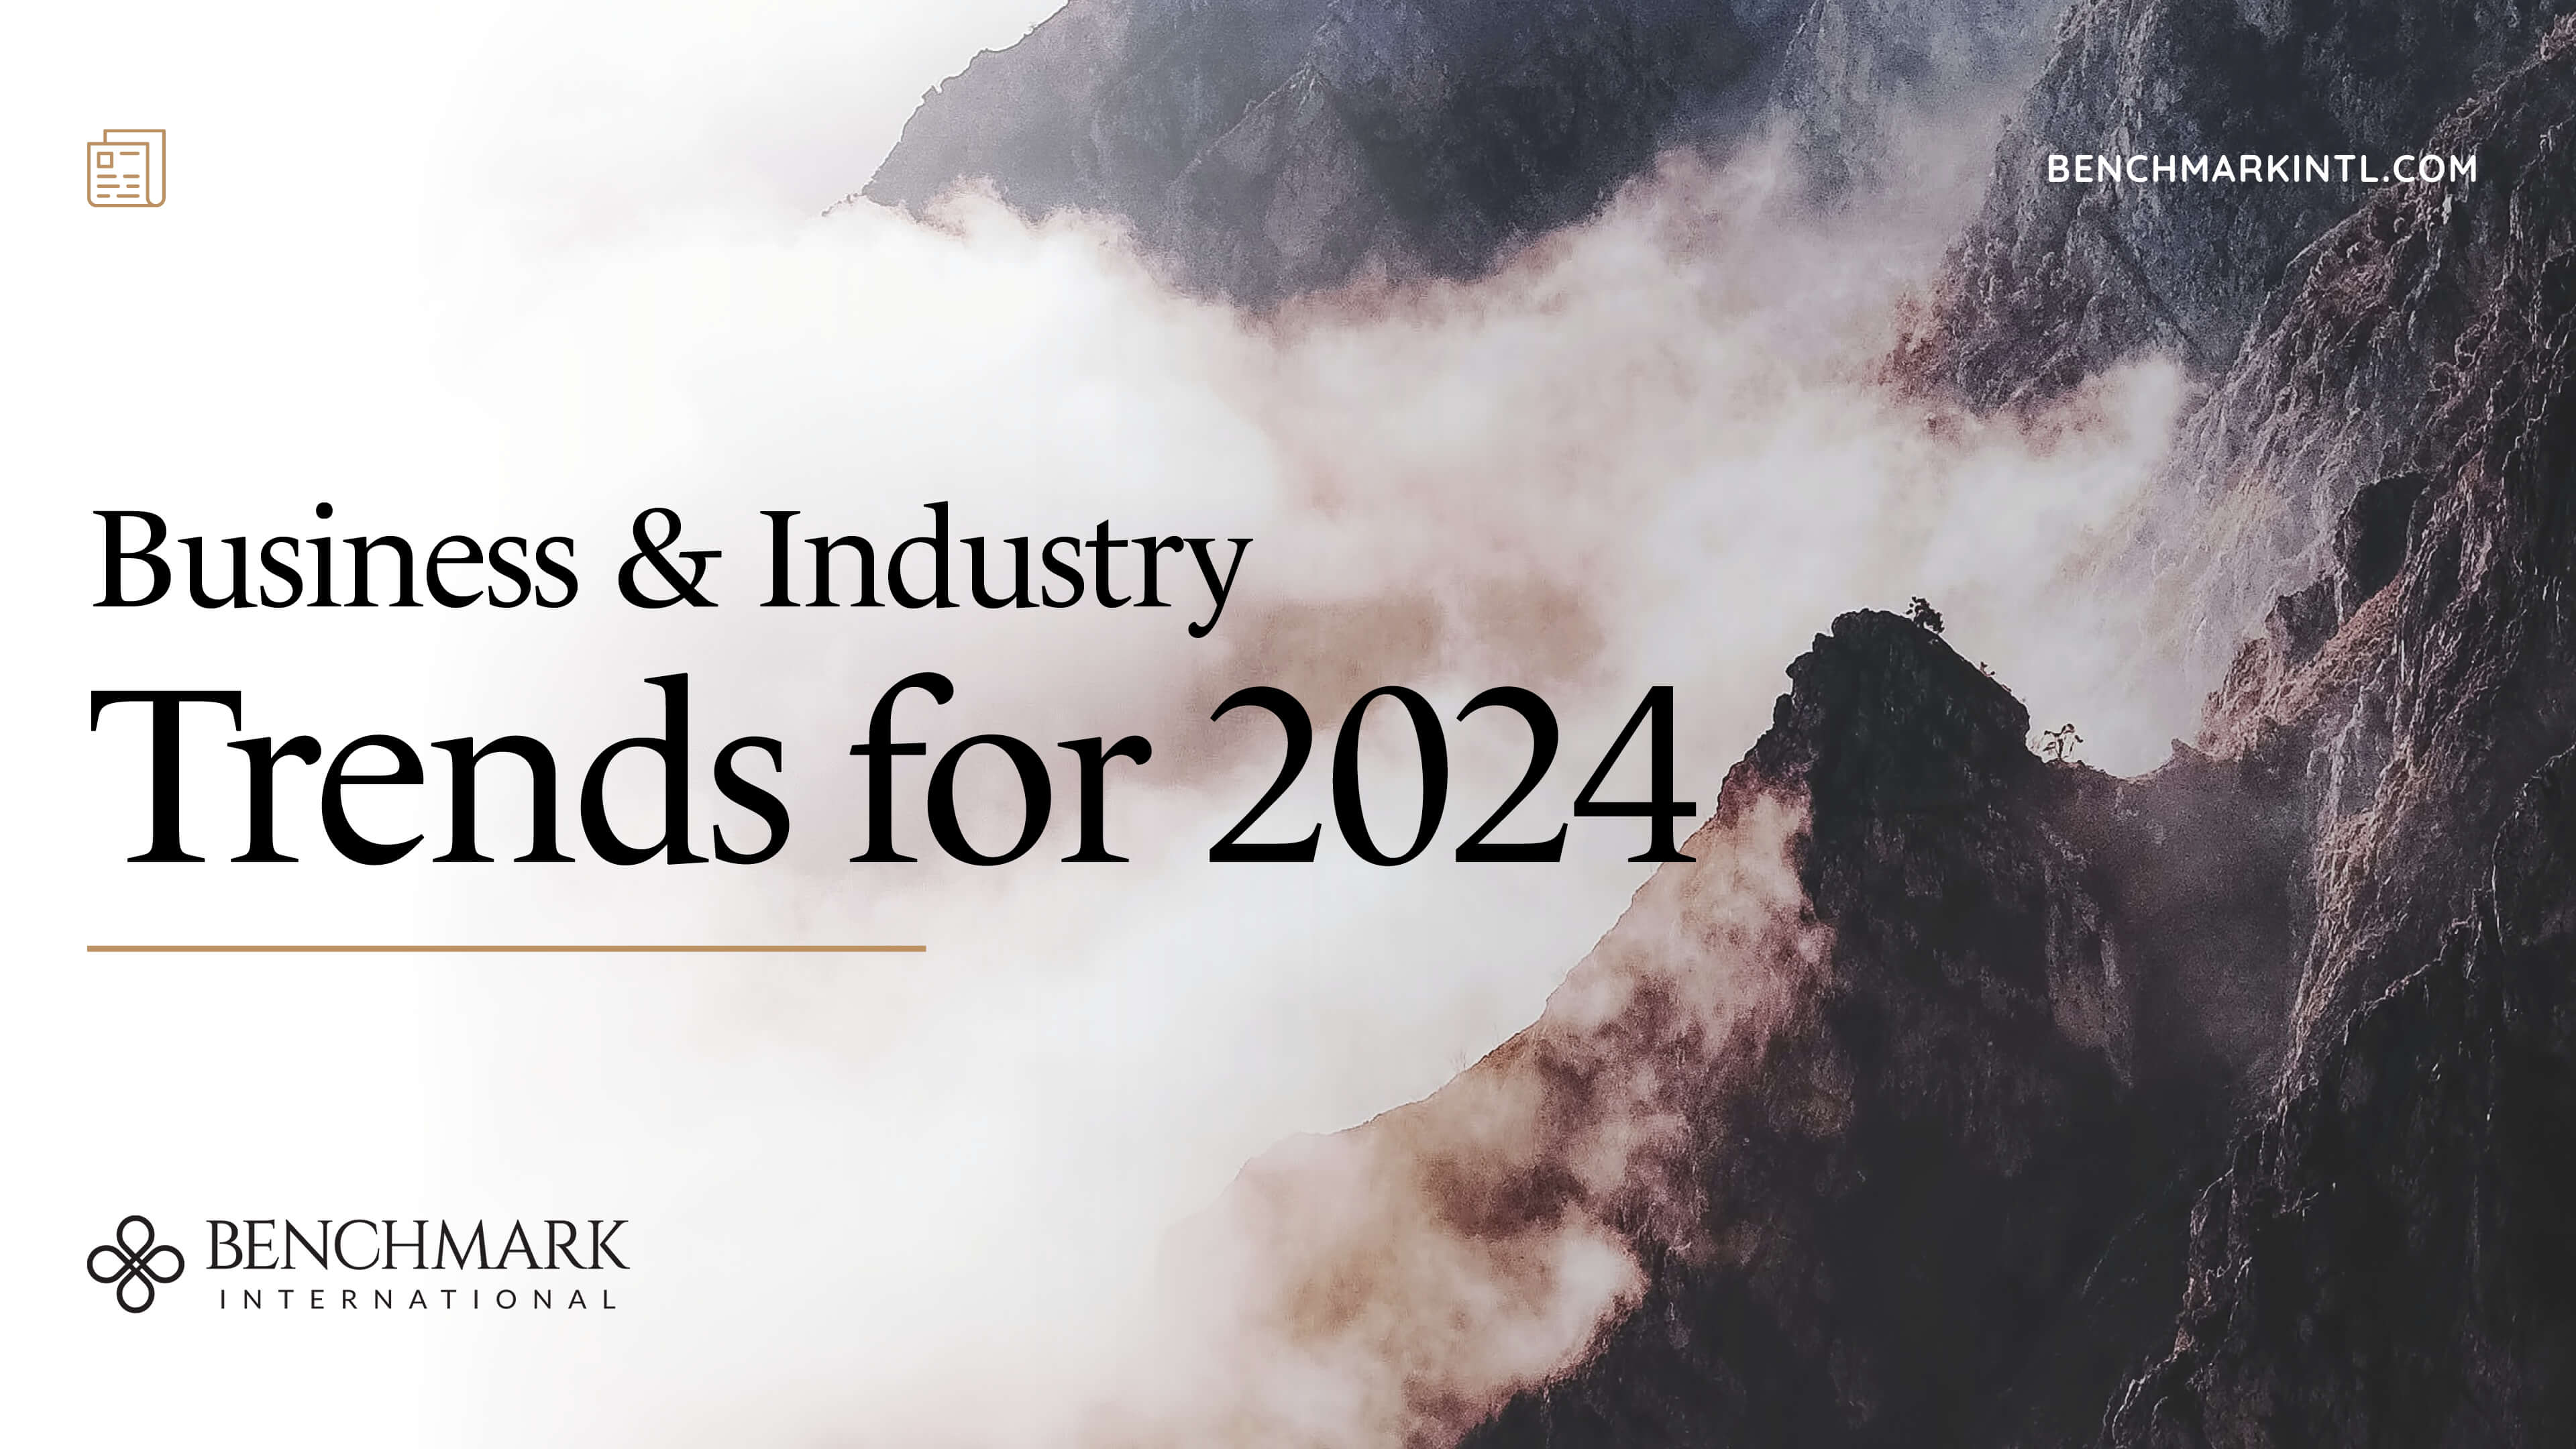 Business & Industry Trends of 2024